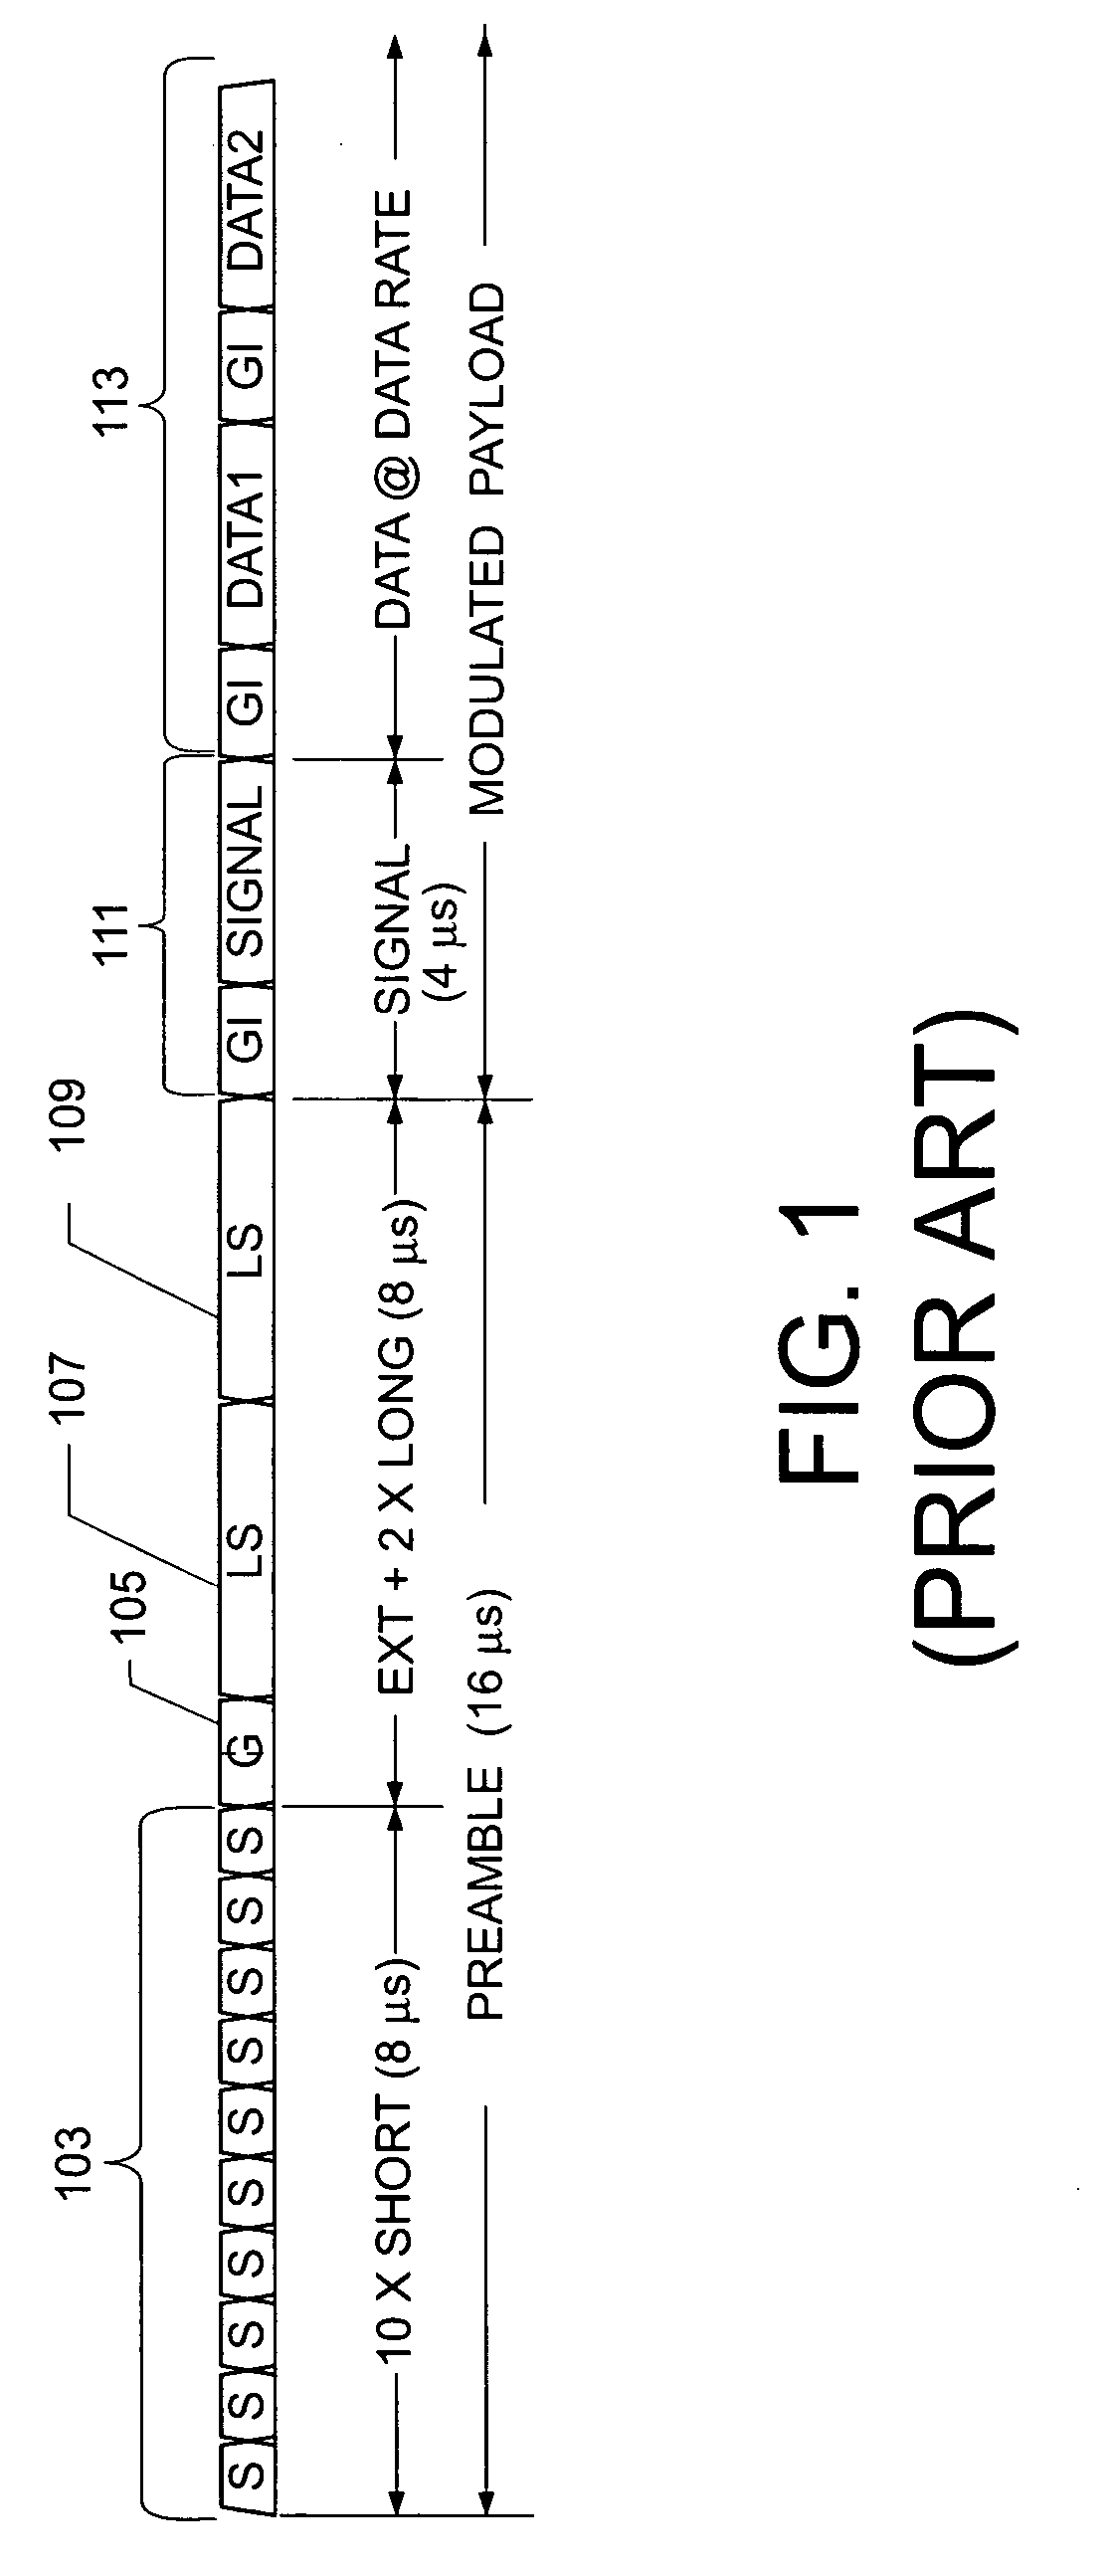 Method and apparatus for cell identification in wireless data networks